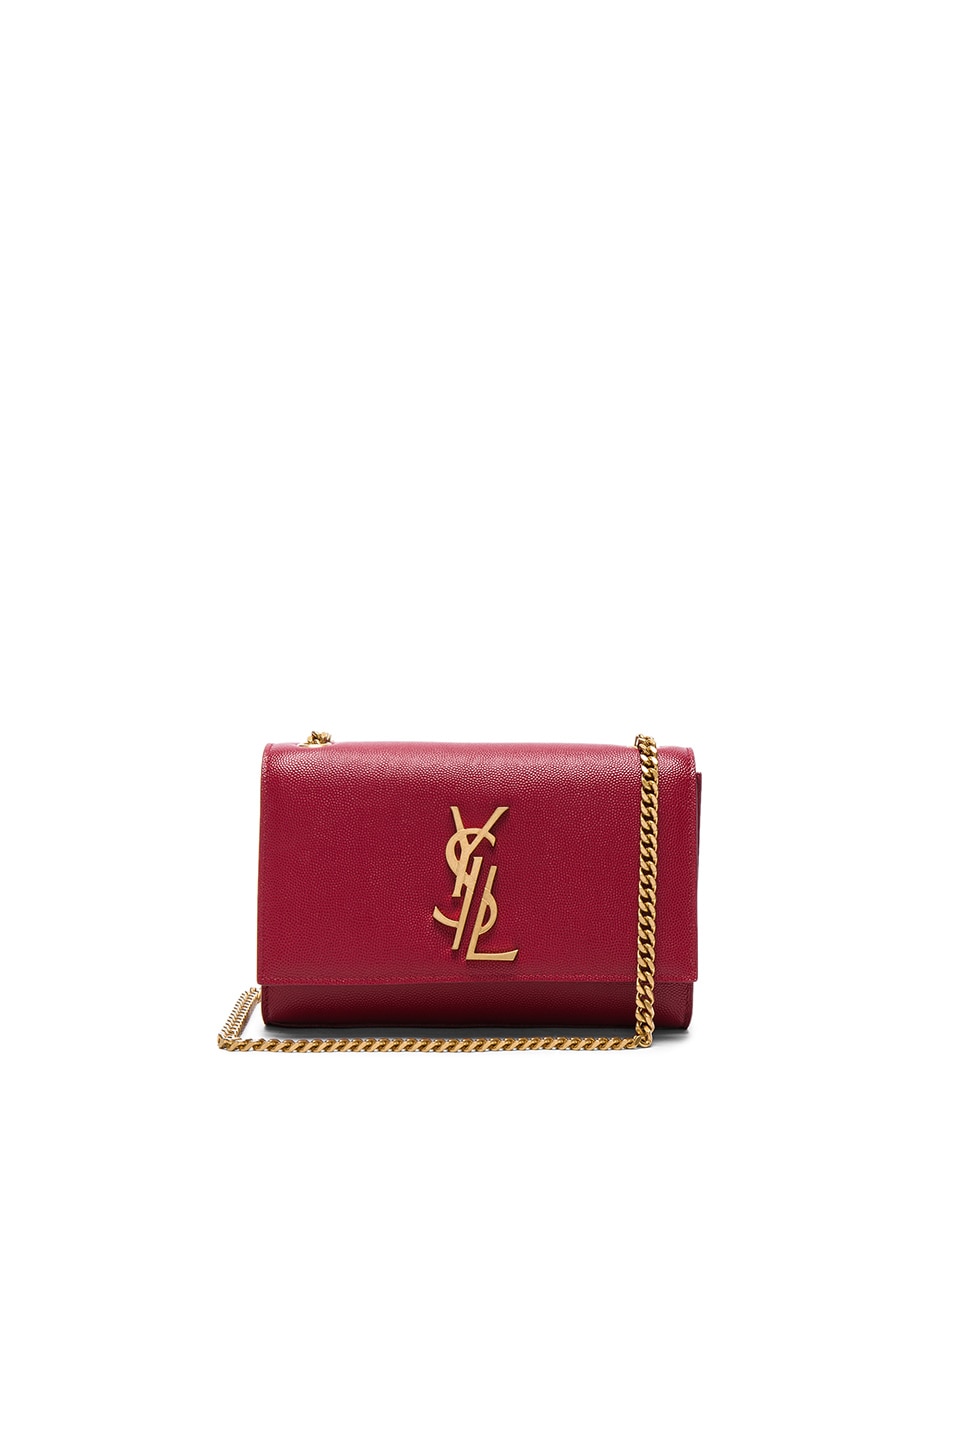 Image 1 of Saint Laurent Small Deconstructed Monogramme Kate Clutch in Lipstick Red